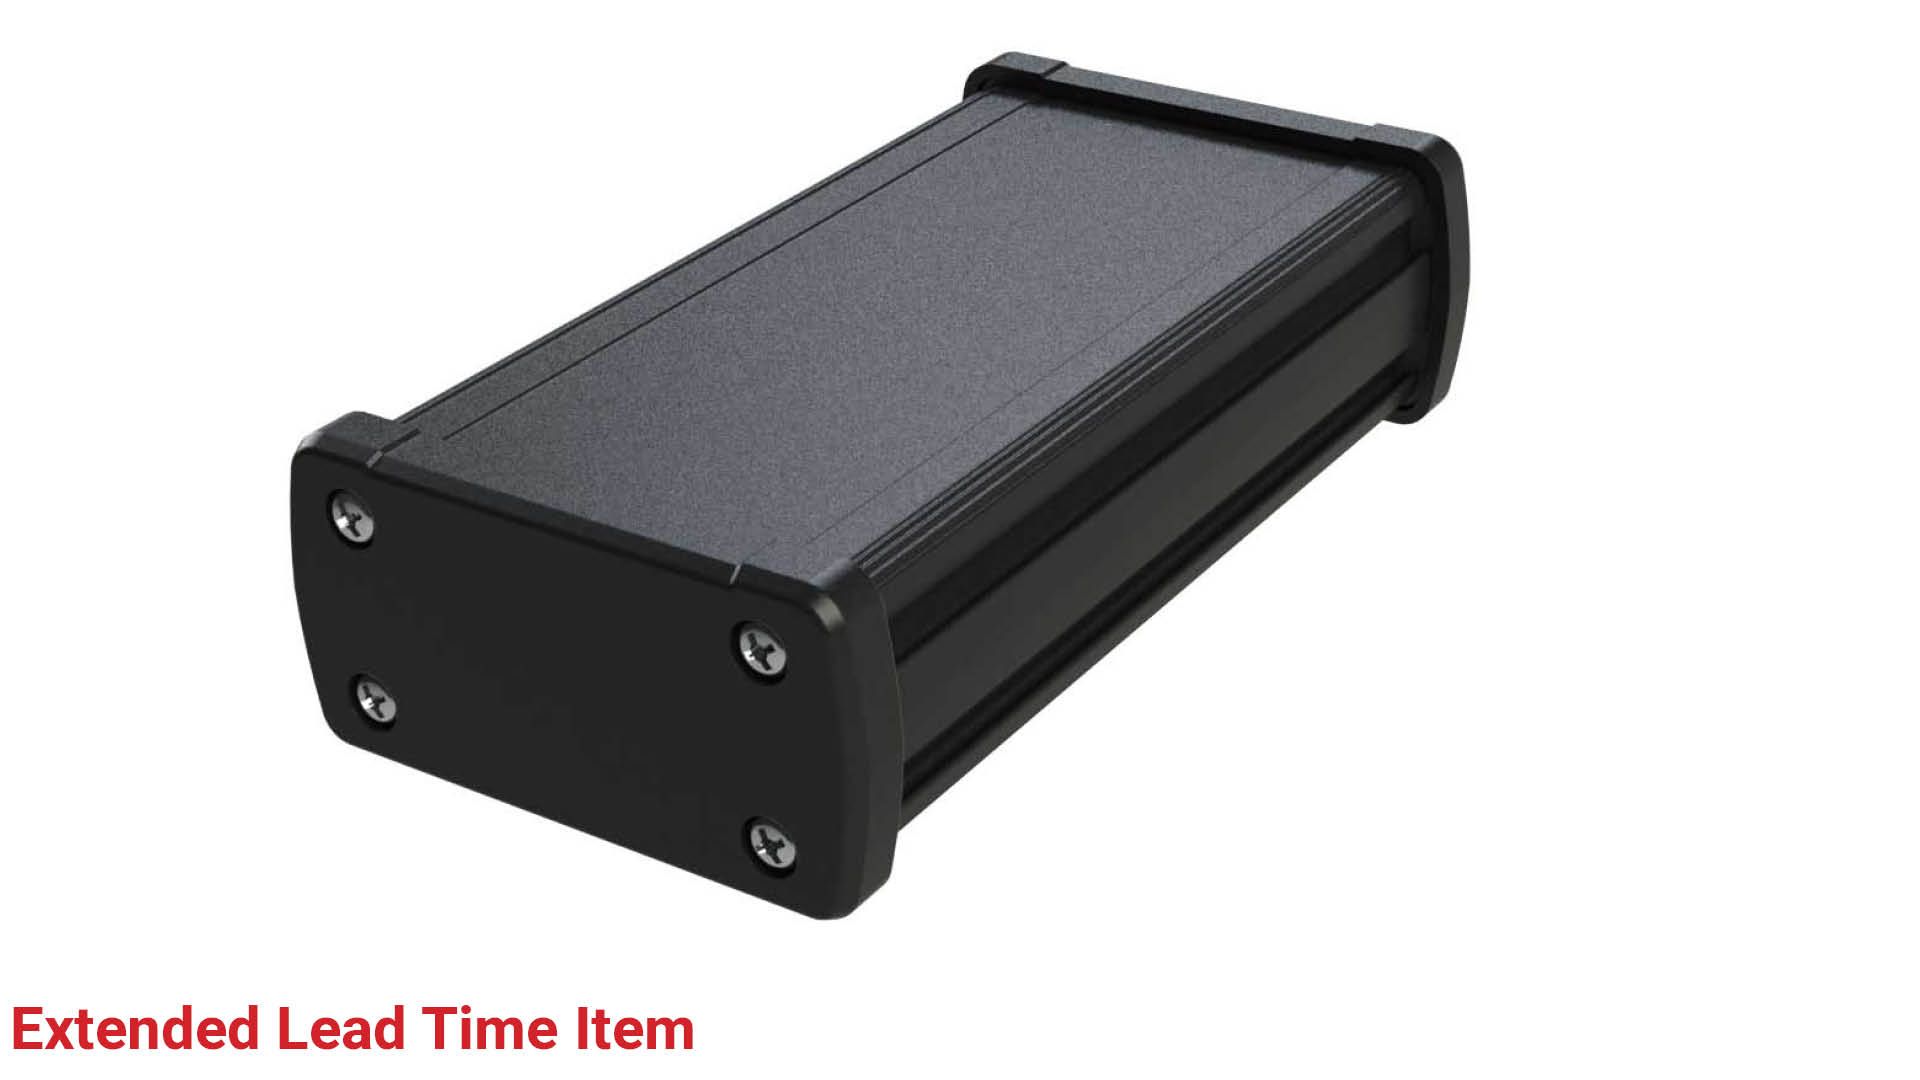 Details about   115mmx67mmx43mm Multi-purpose Electronic Extruded Aluminum Enclosure Box Black 